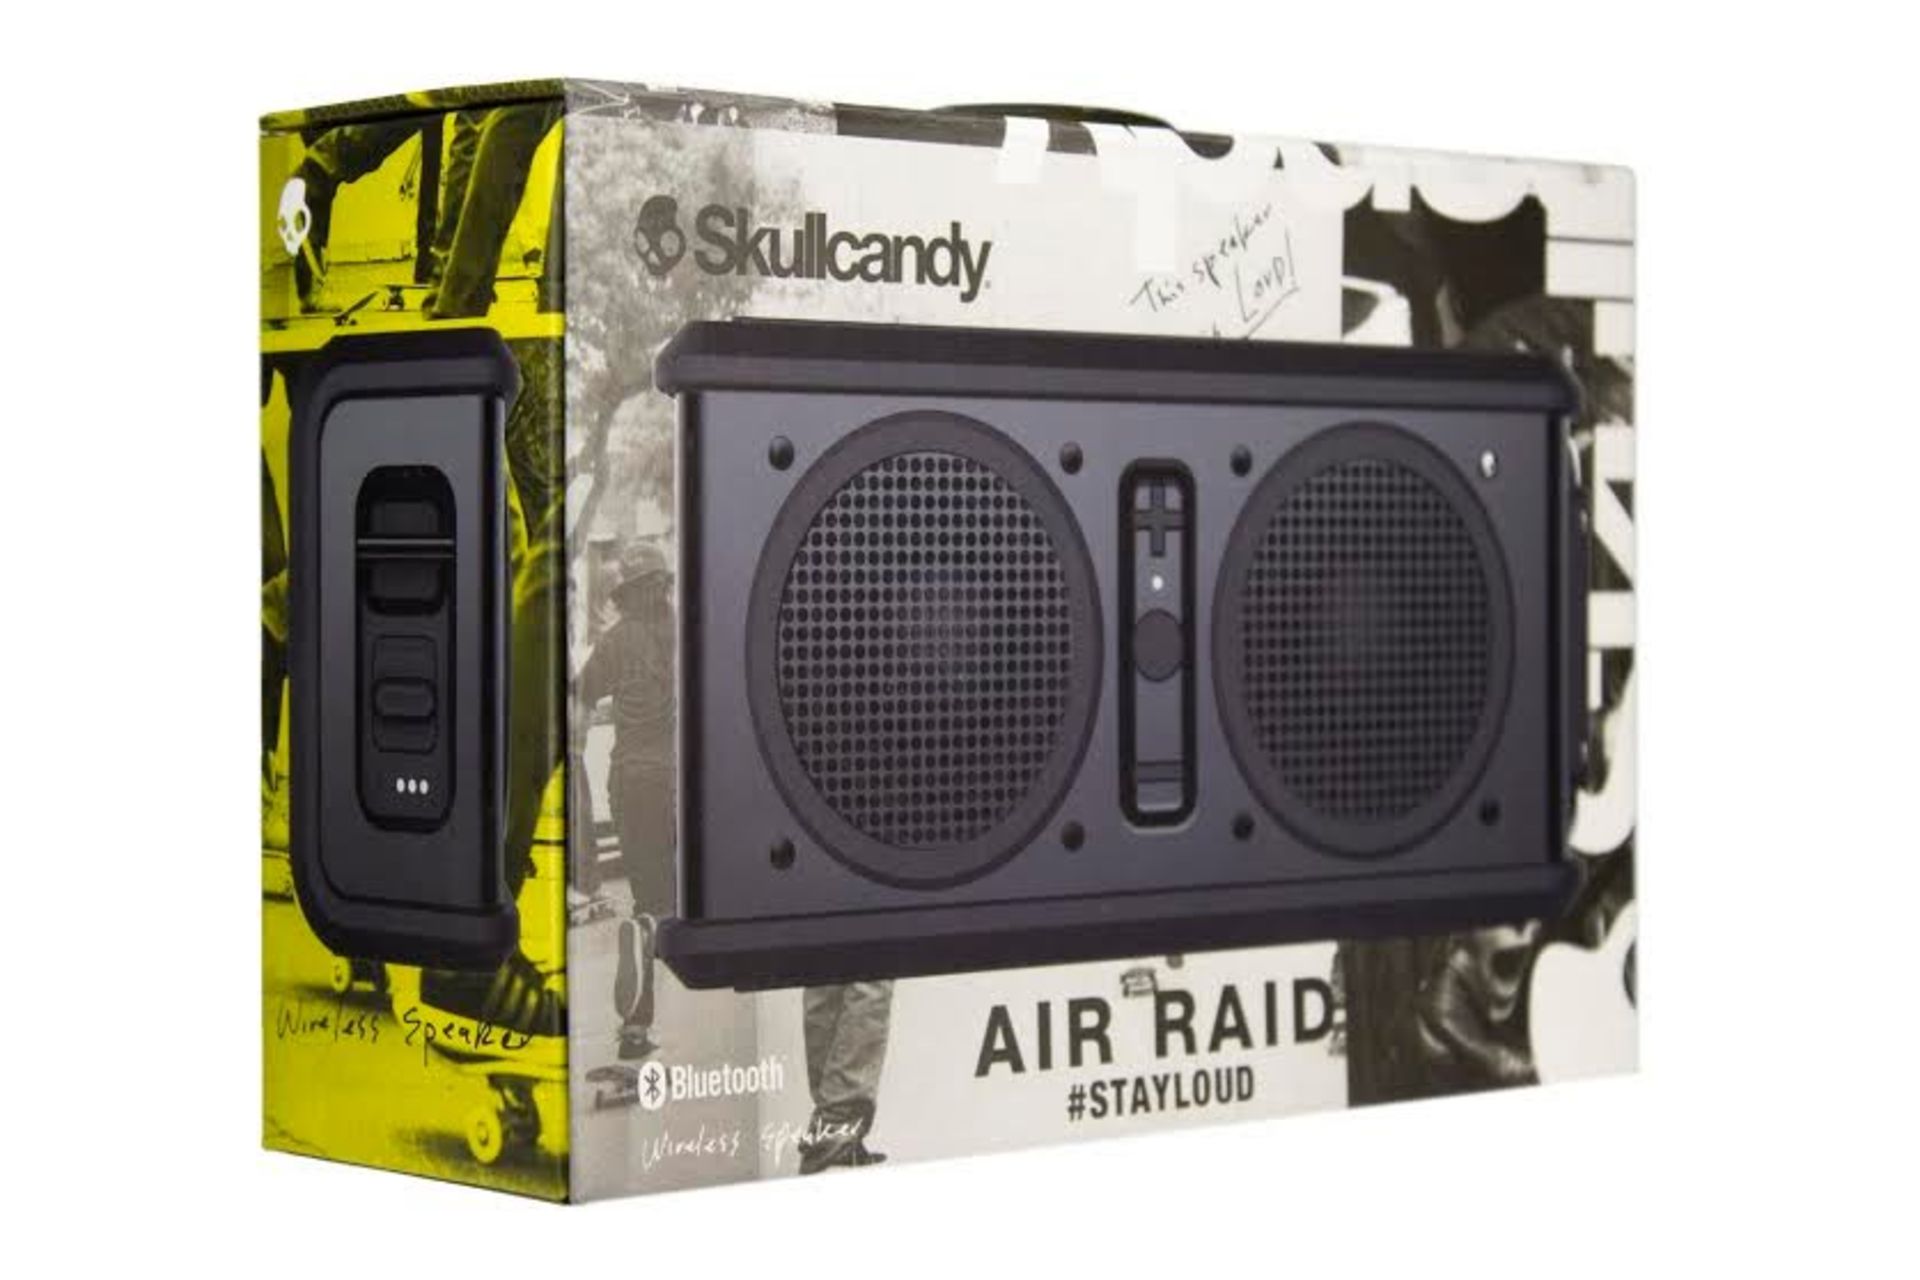 V *TRADE QTY* Brand New Skull Candy Air Raid #Stayloud Bluetooth Wireless Water Resistant Speakers - - Bild 2 aus 2